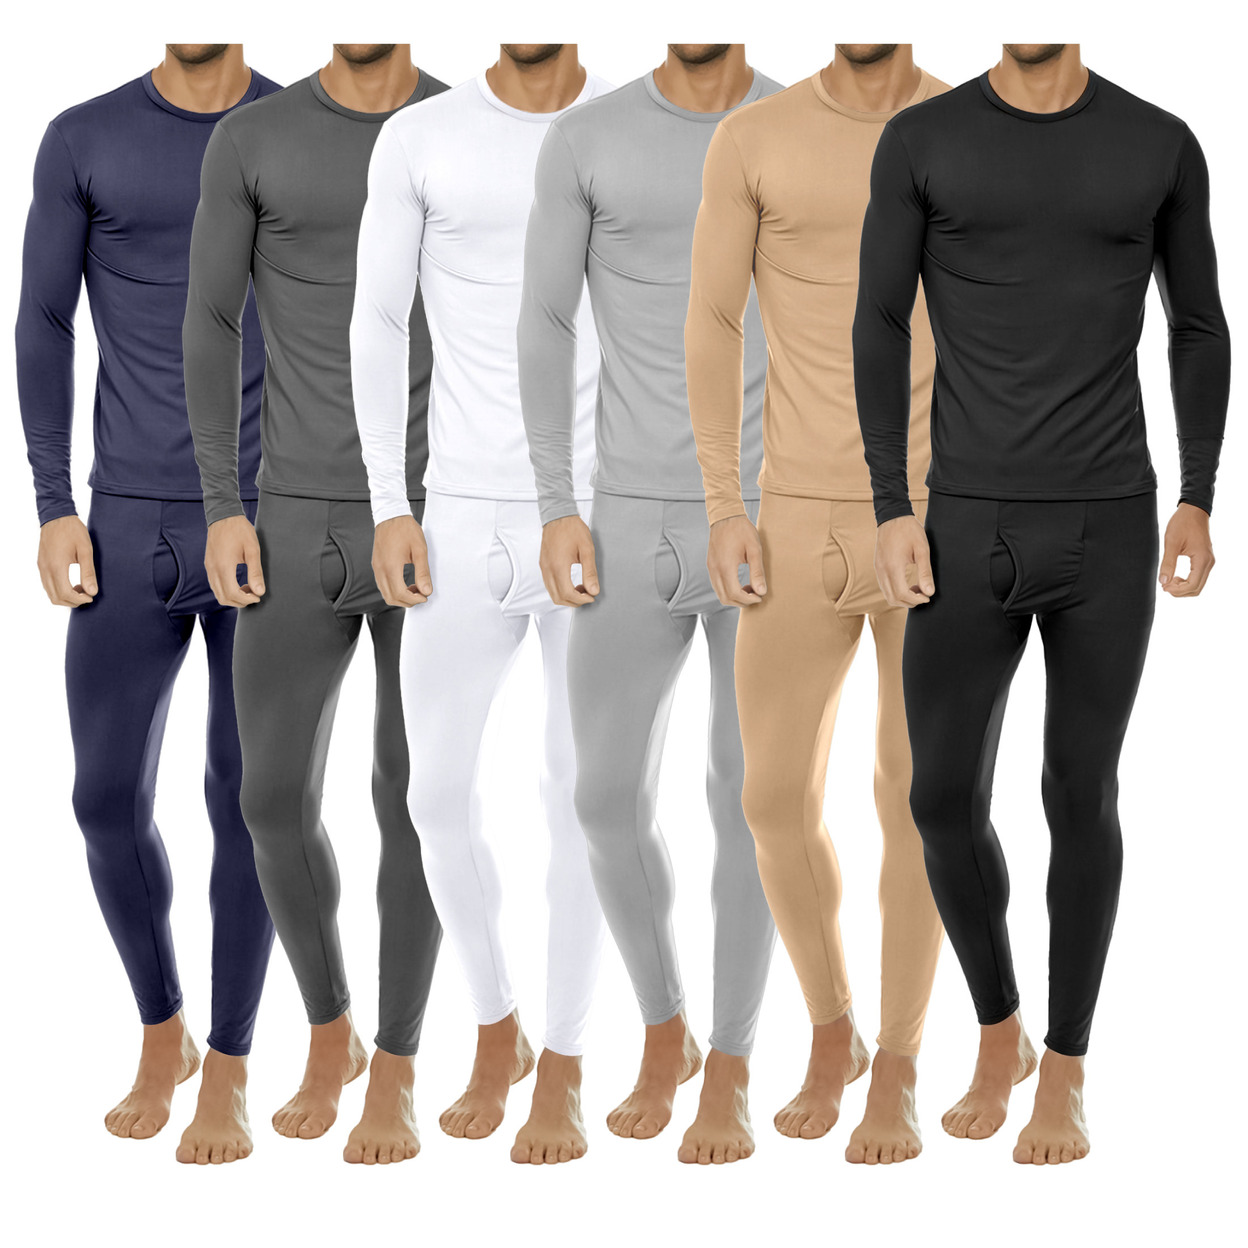 2-Pieces: Men's Winter Warm Fleece Lined Thermal Underwear Set For Cold Weather - White, Xx-large